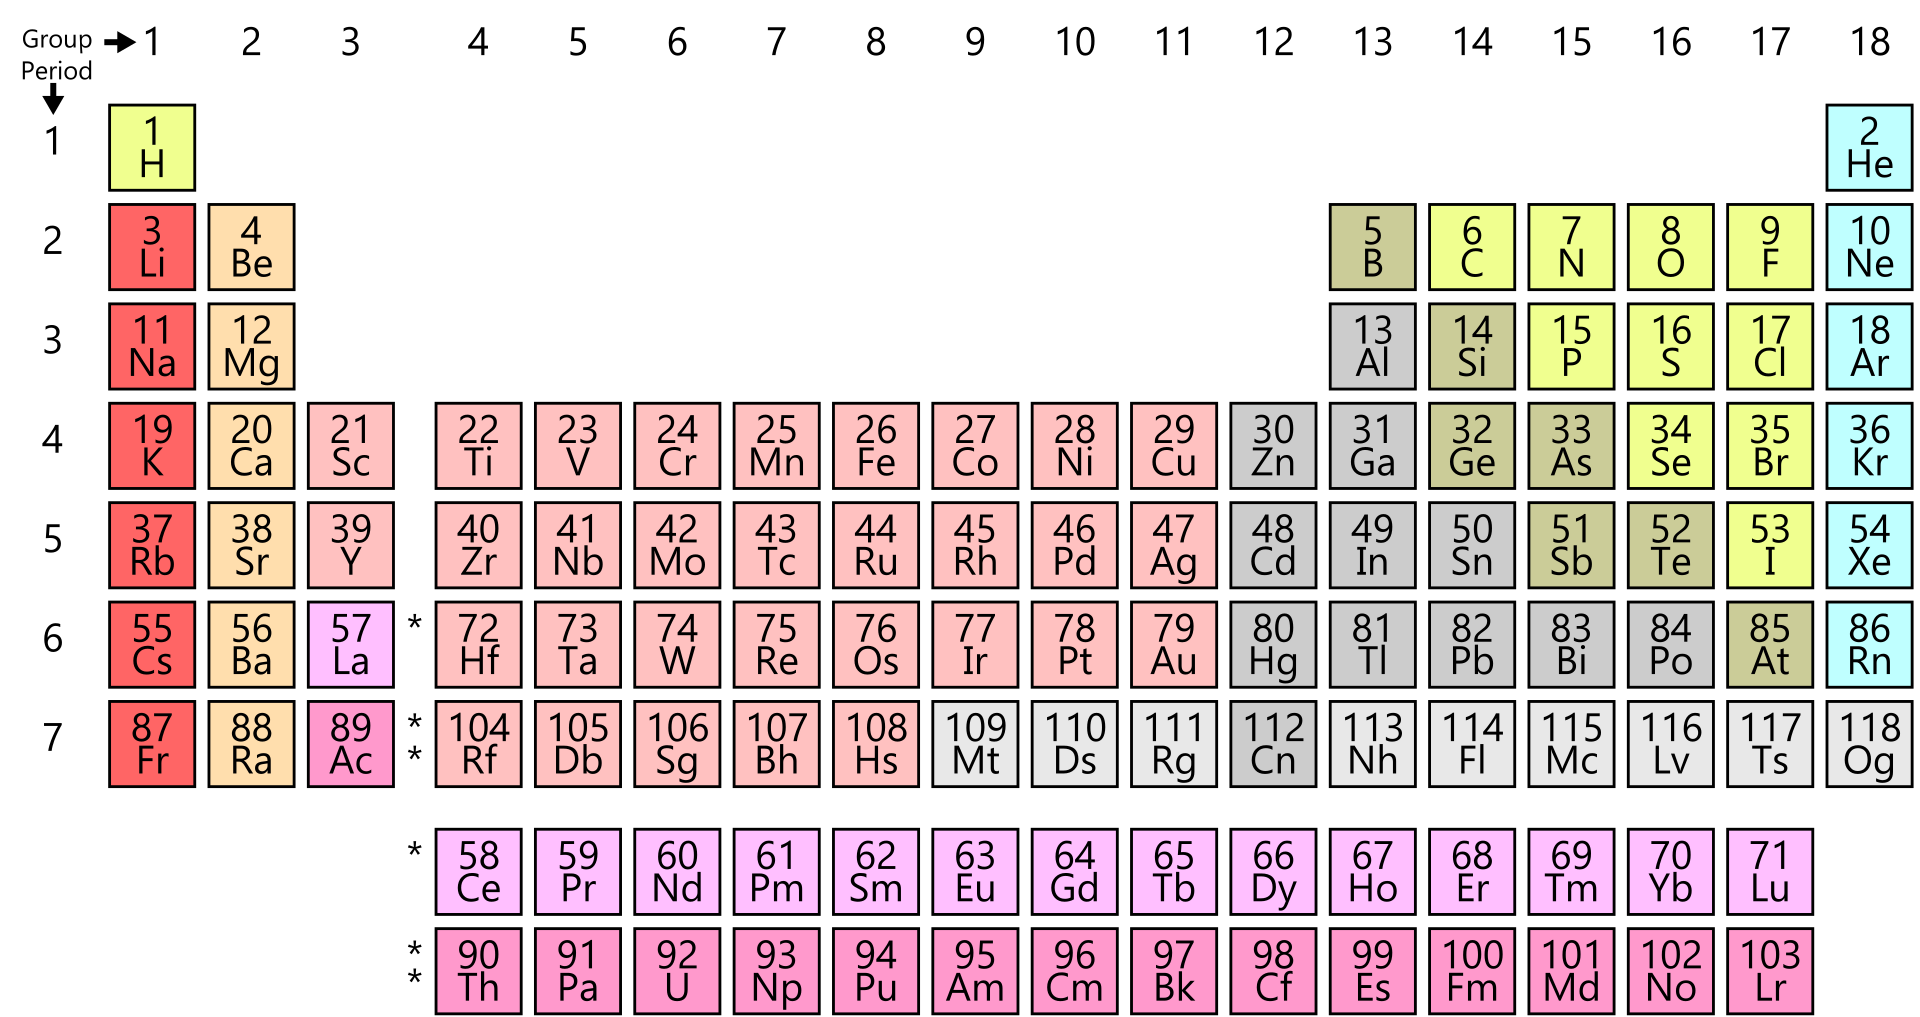 co element table